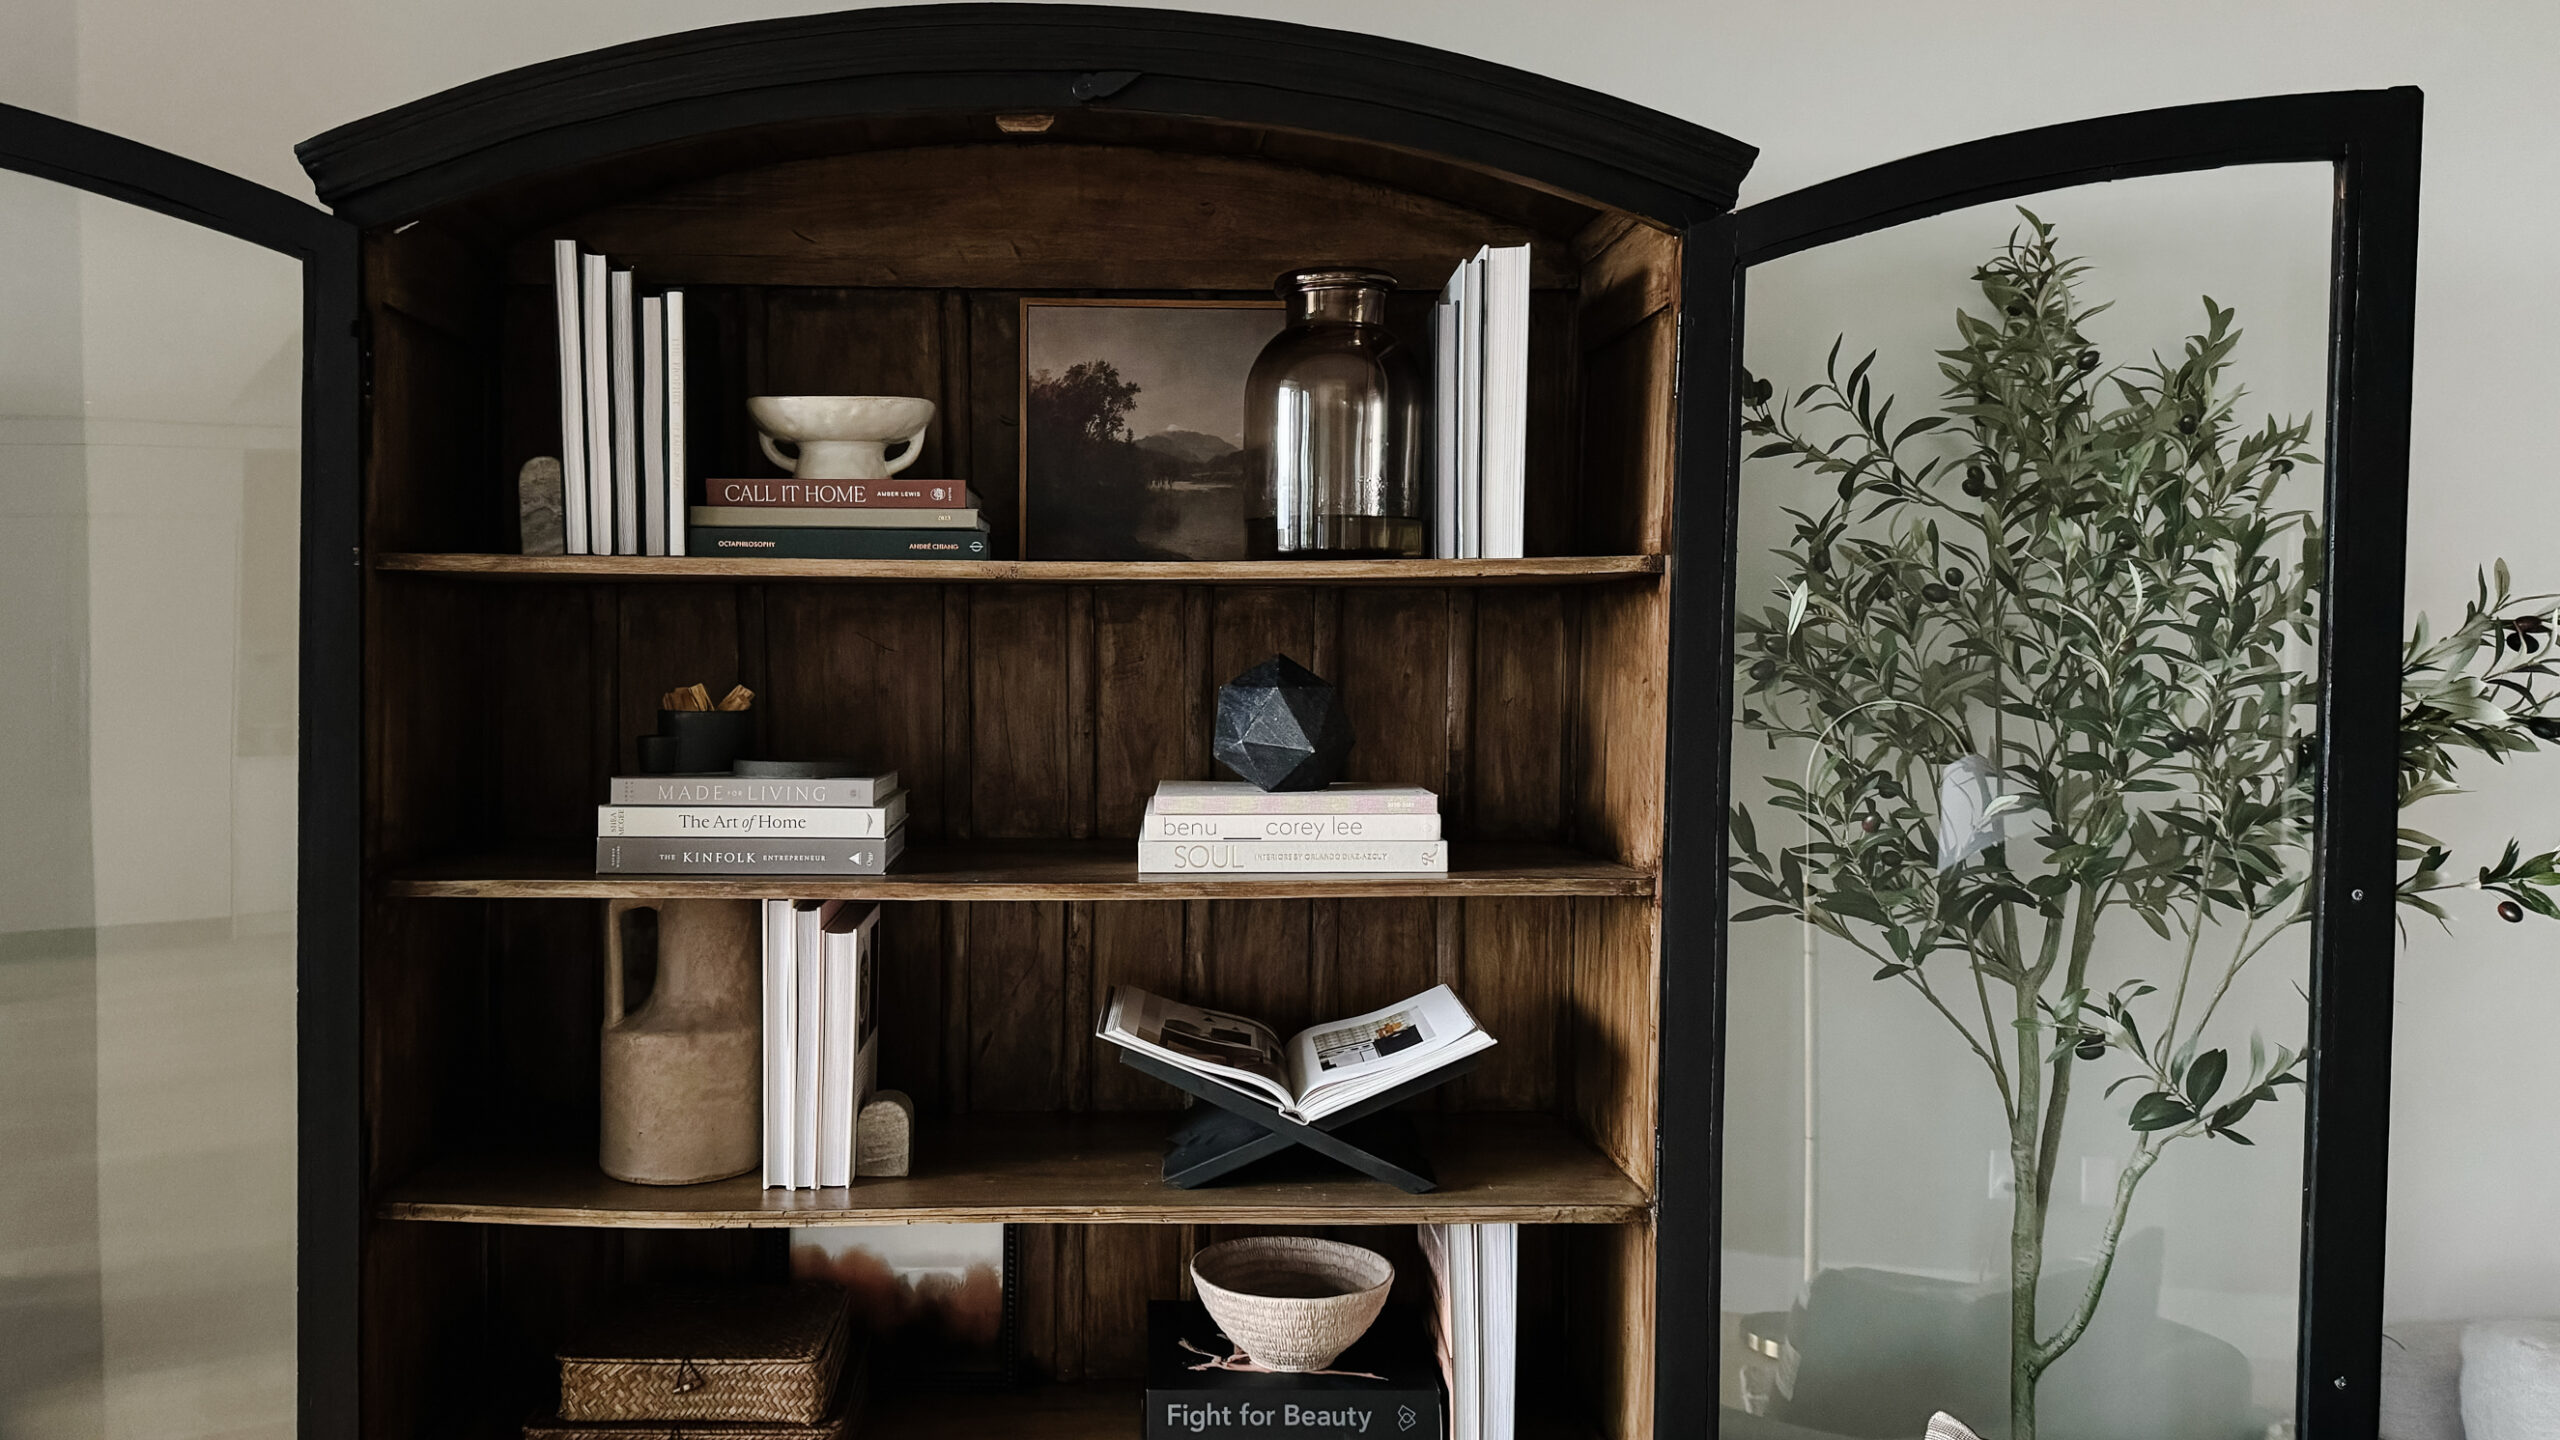 Styling Shelves - a black bookshelf cabinet that is arched with wood interior having been styled with vases, pots, books, etc. is on display